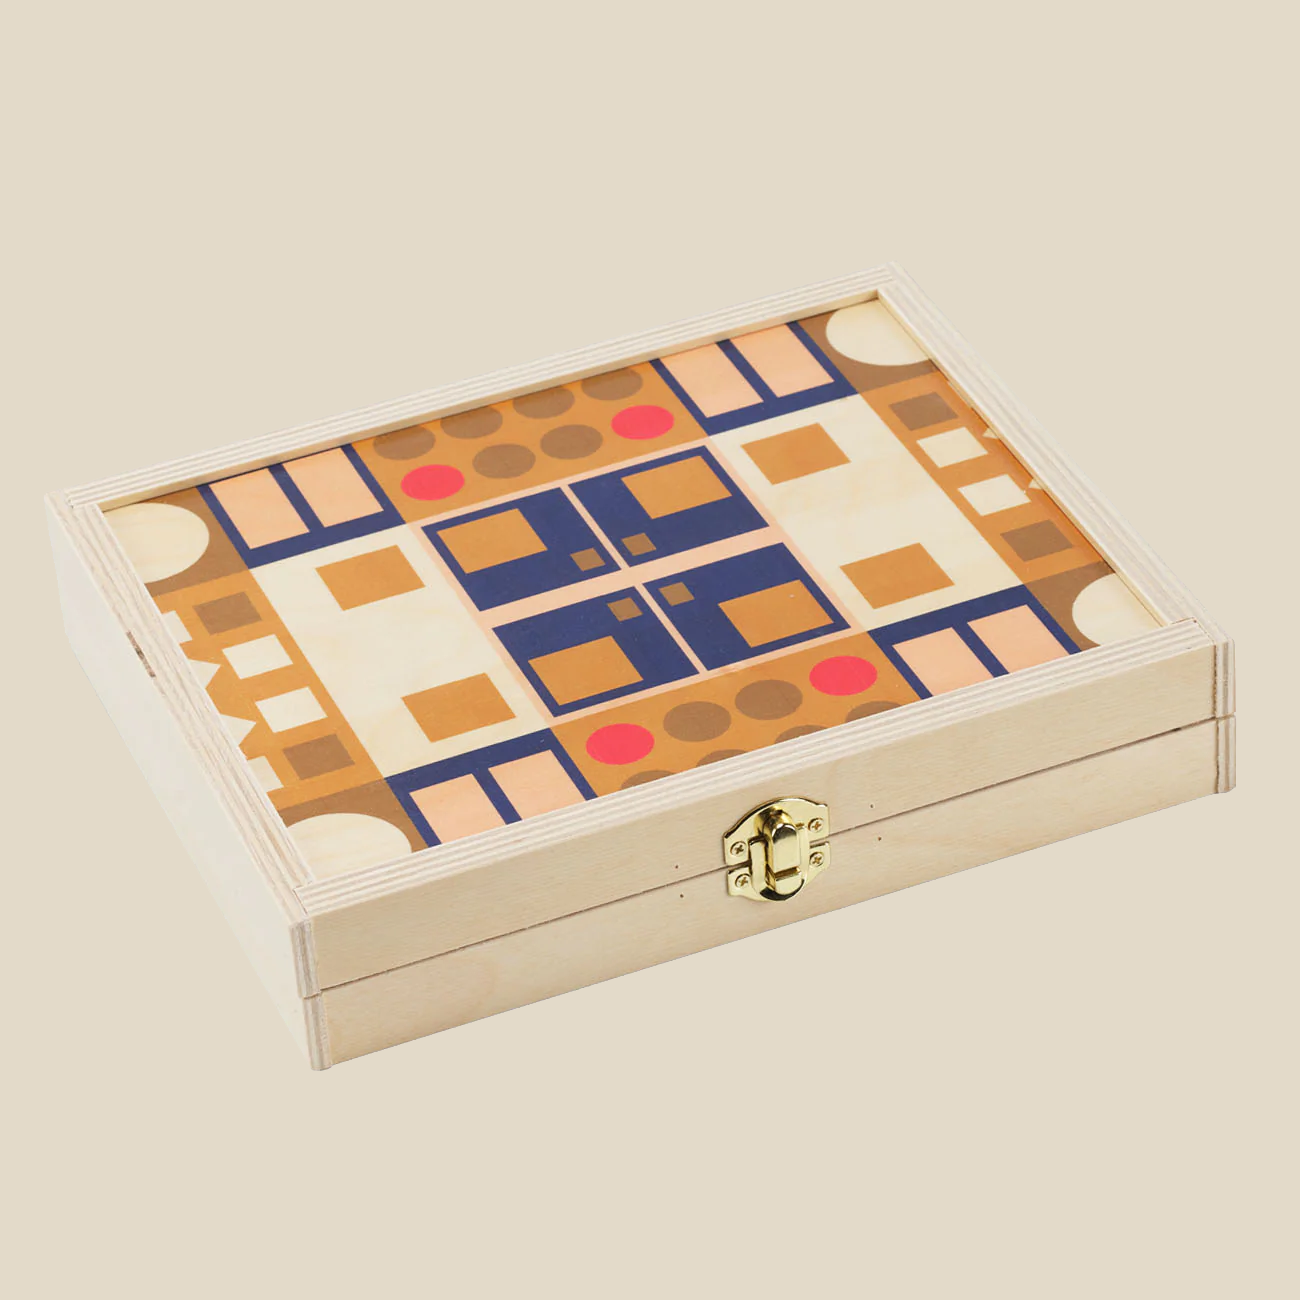 “Alexander Olive” travel backgammon set on beige background. Pattern depicts a geometric mid-century inspired pattern in orange and blue hues. Brass closure.